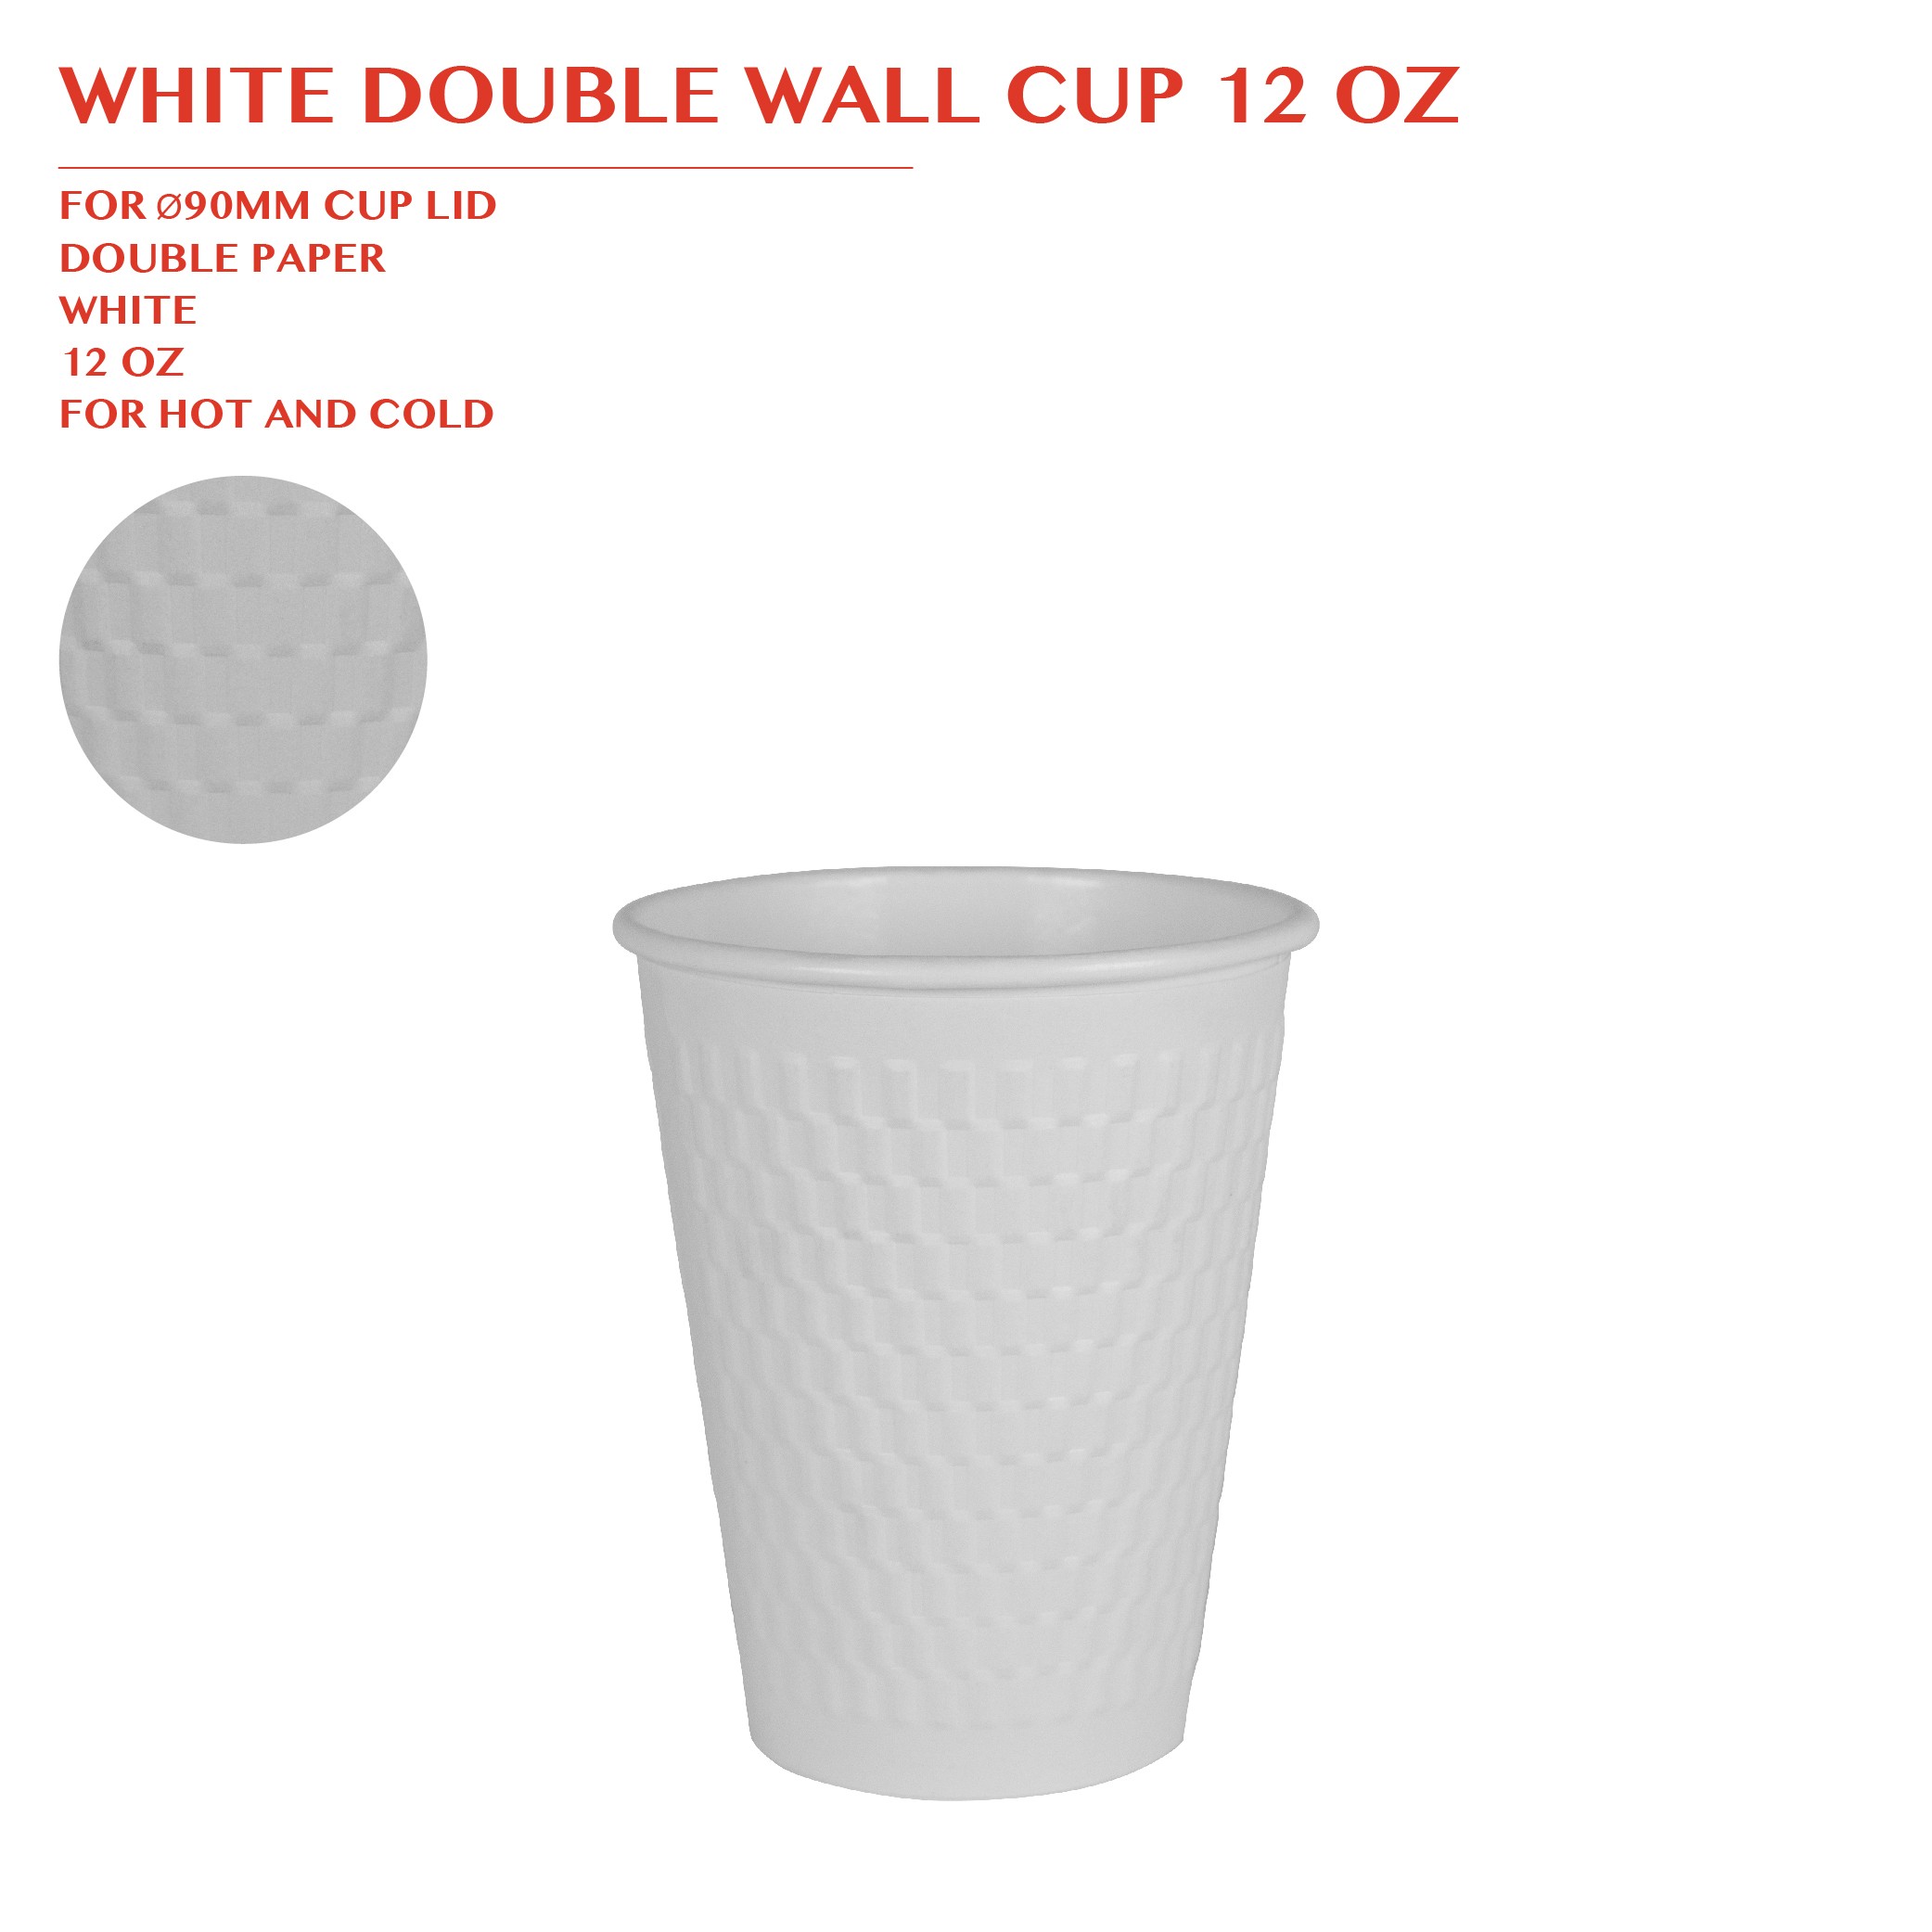 PRE-ORDER WHITE DOUBLE WALL CUP 12 OZ